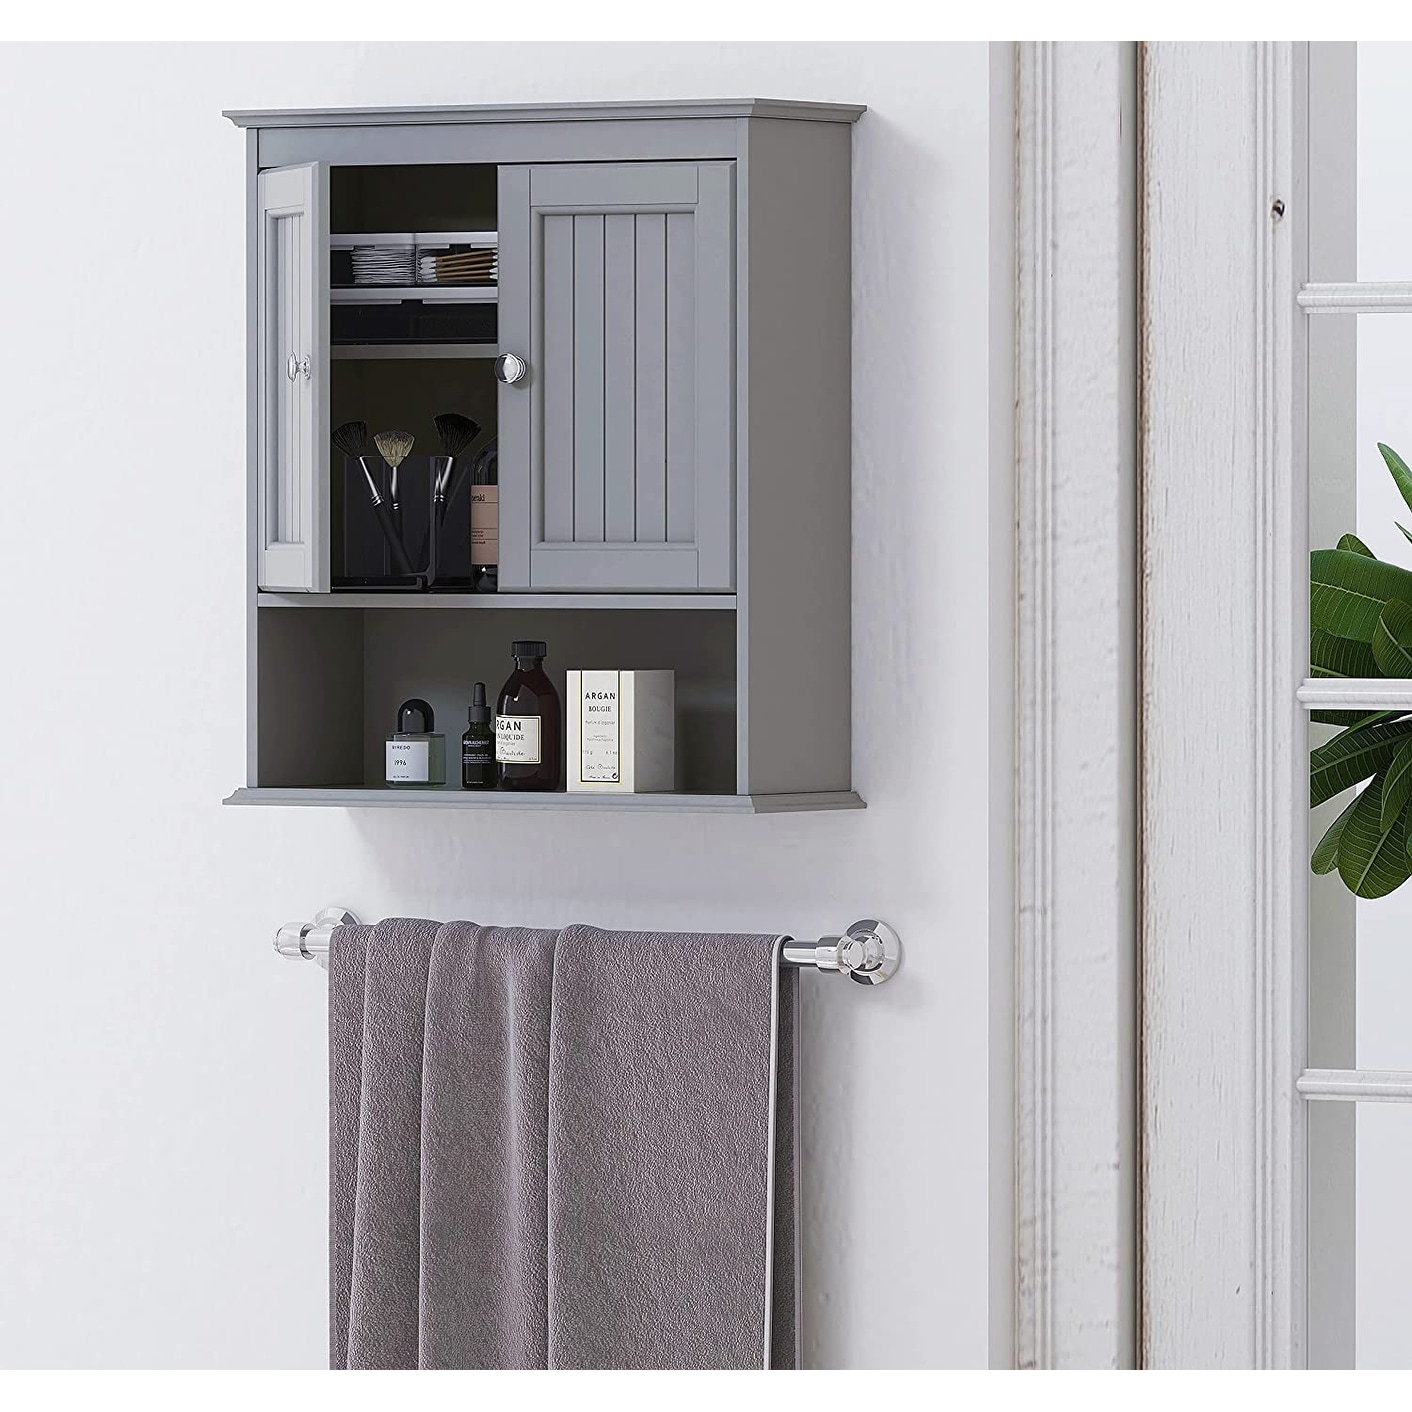 https://ak1.ostkcdn.com/images/products/is/images/direct/a00c35521f6a90d350e7aa5d506b2ccc3c99e6f9/Spirich-Bathroom-Wall-Spacesaver-Storage-Cabinet-Over-The-Toilet-with-Door-%2C-Wooden%2C-White.jpg